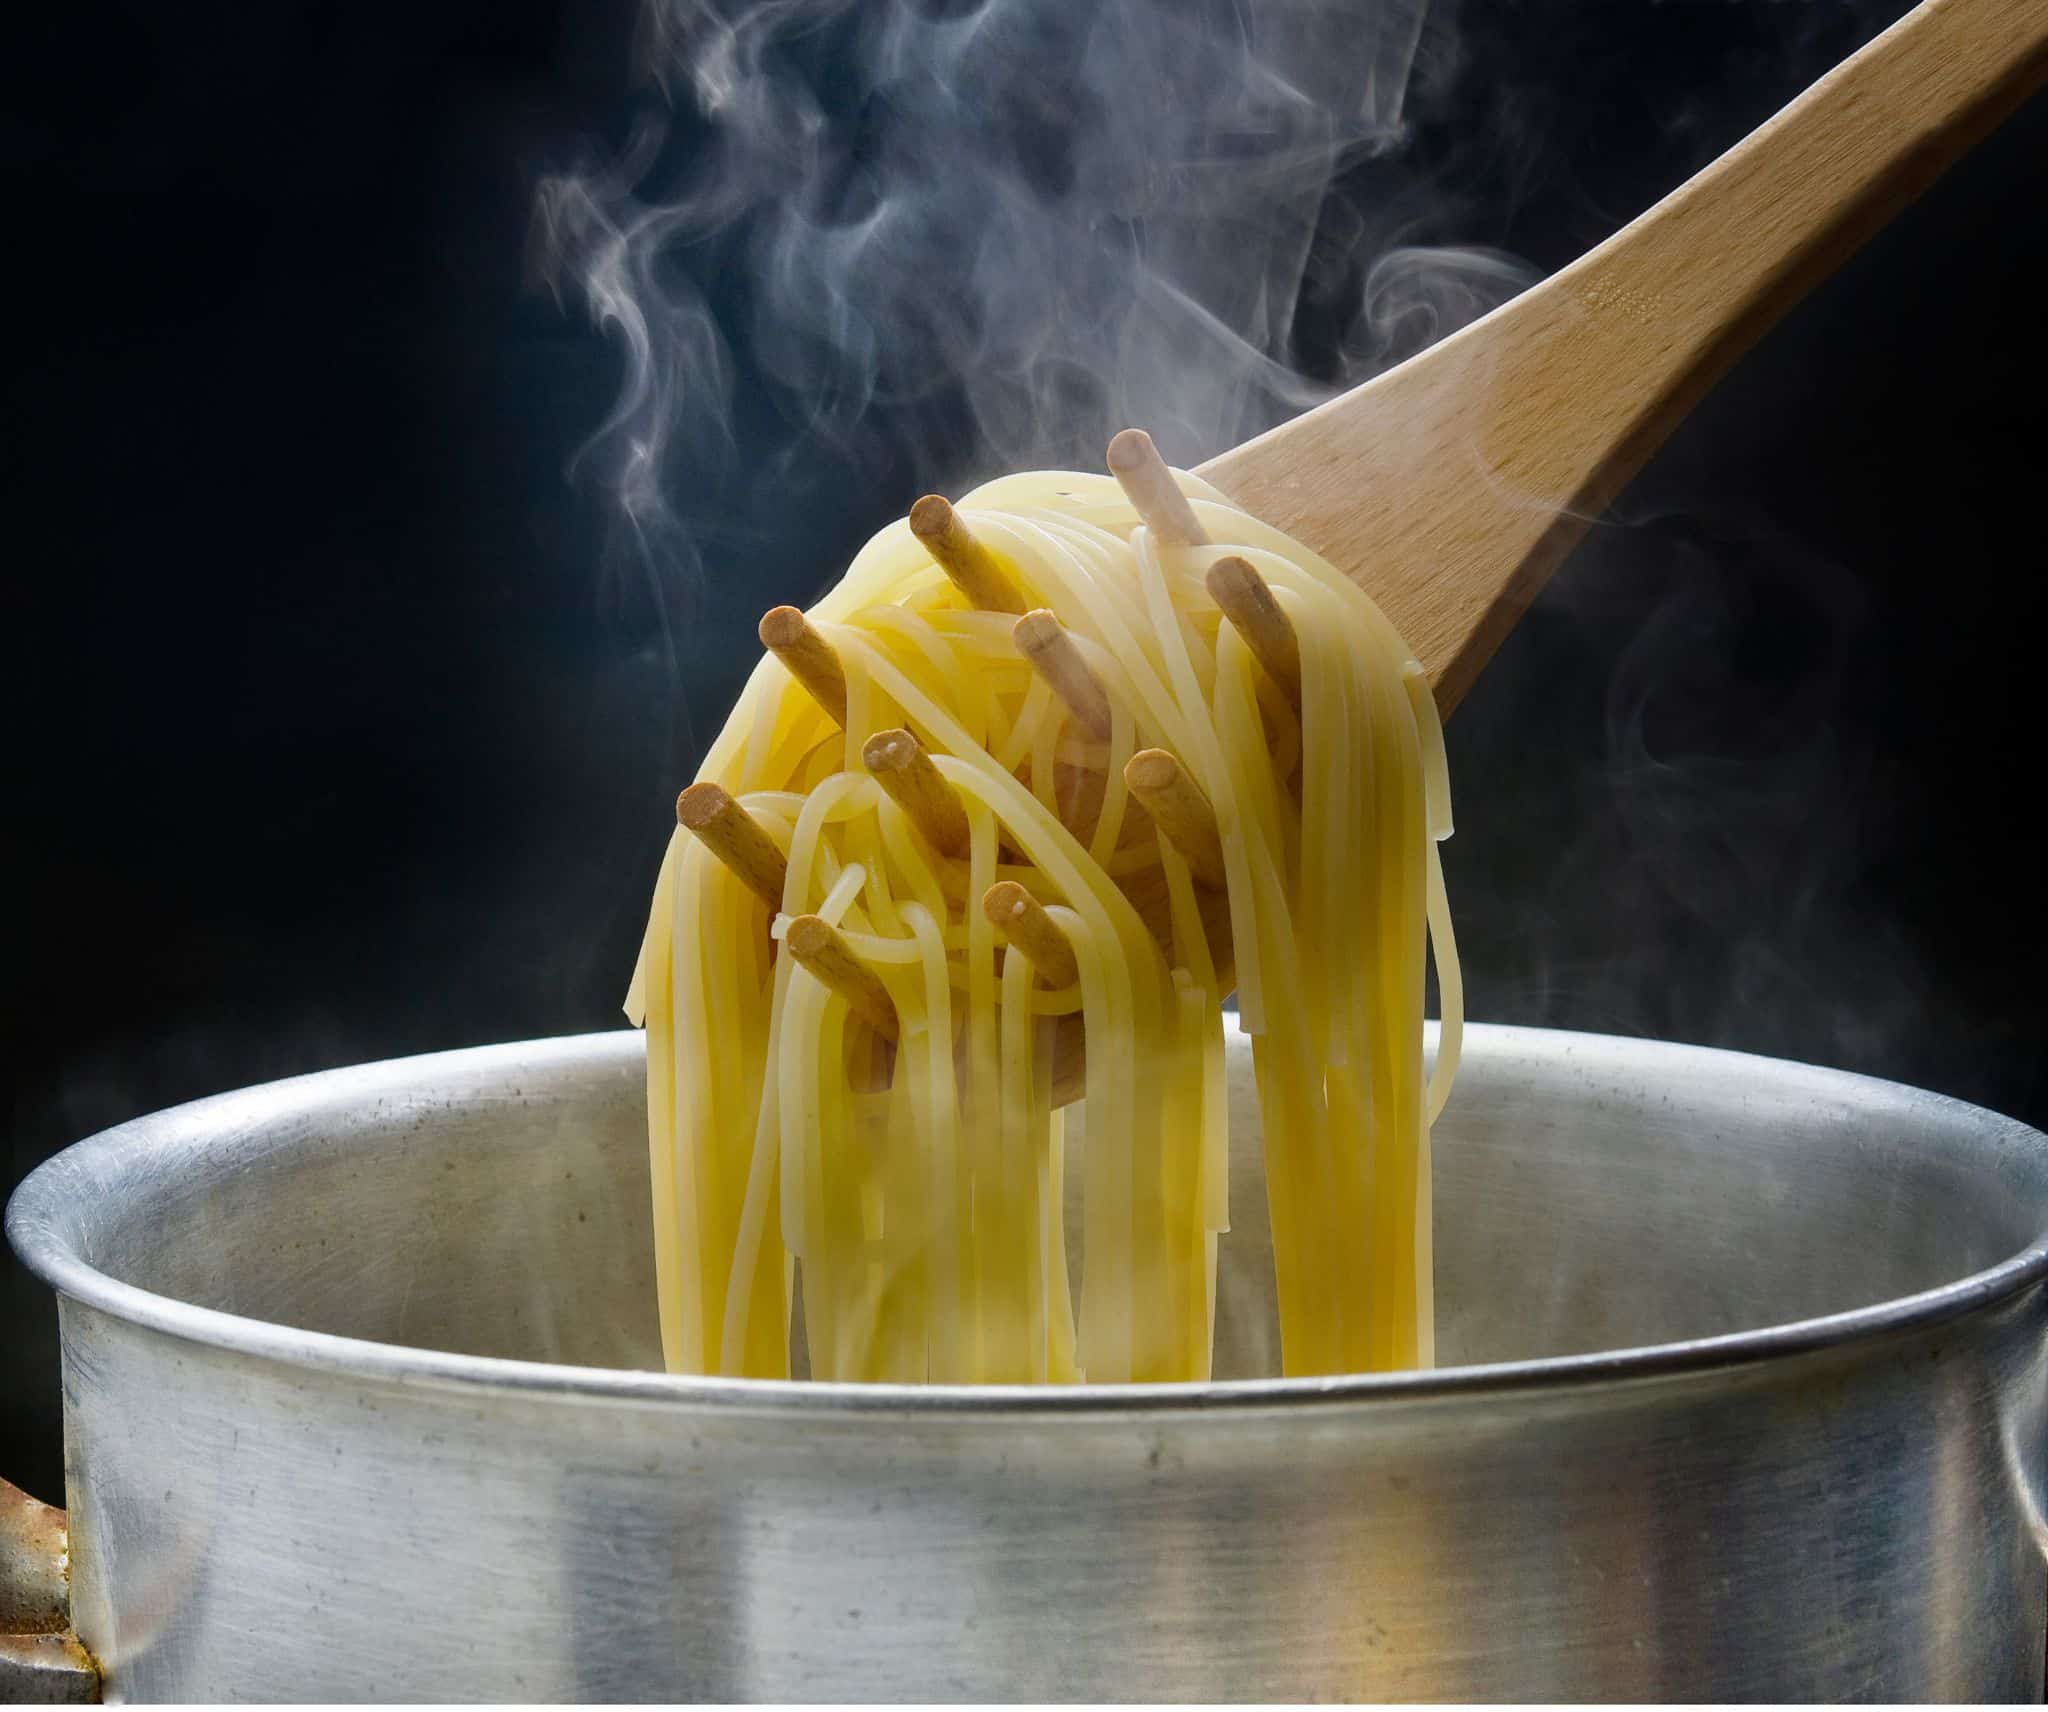 How To Keep Pasta Warm?